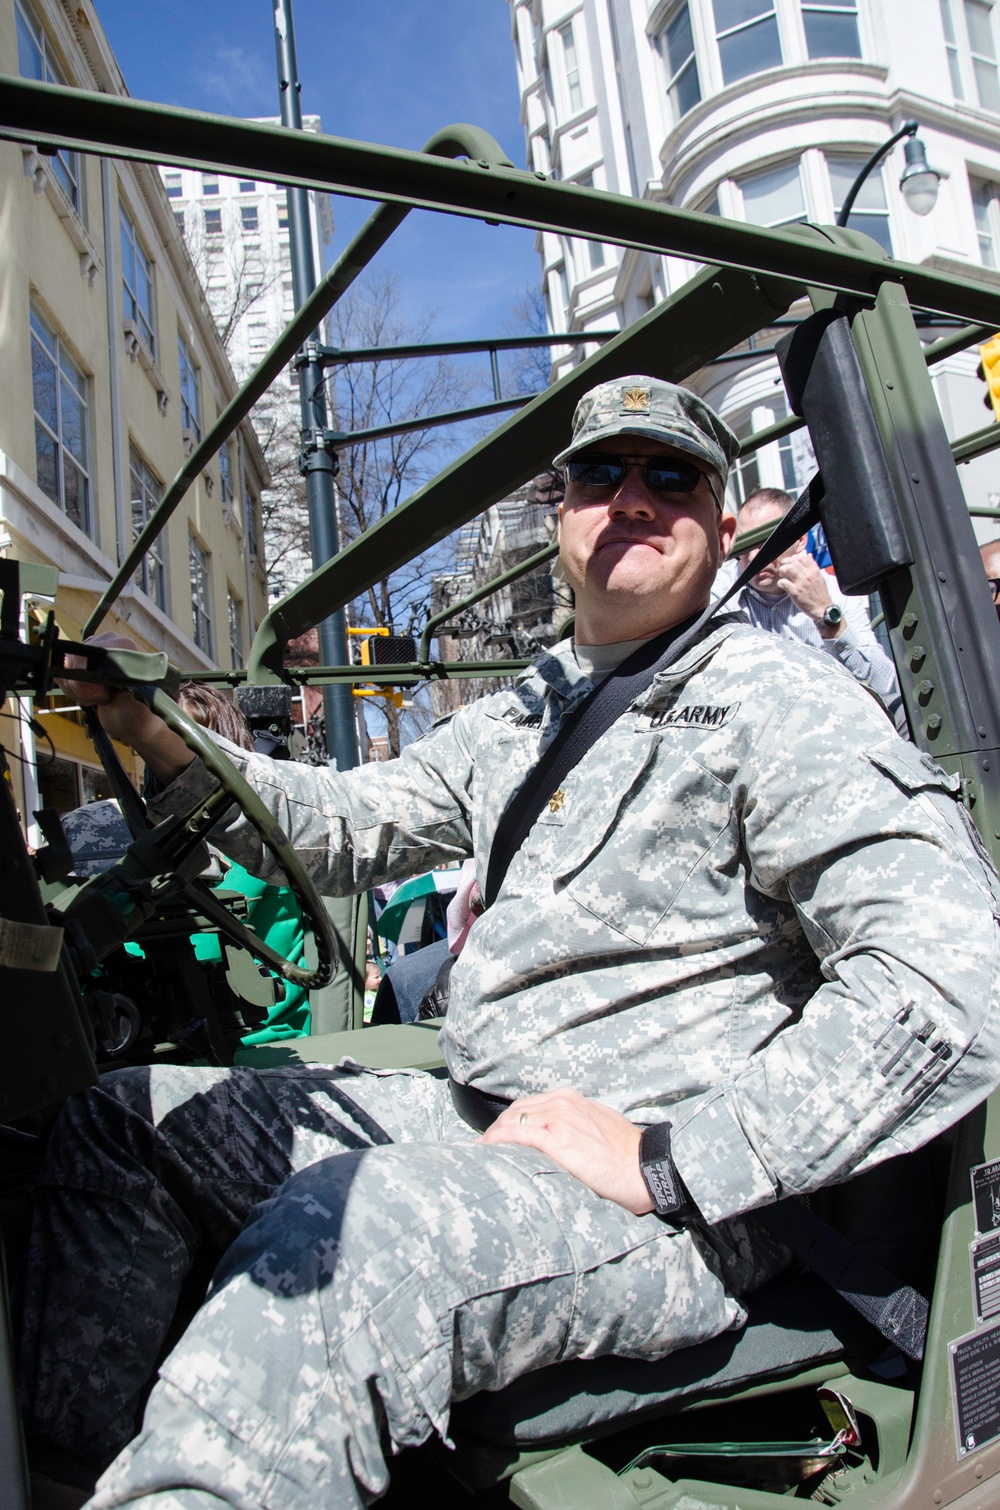 Atlanta St. Patrick’s Day Parade with wounded warriors